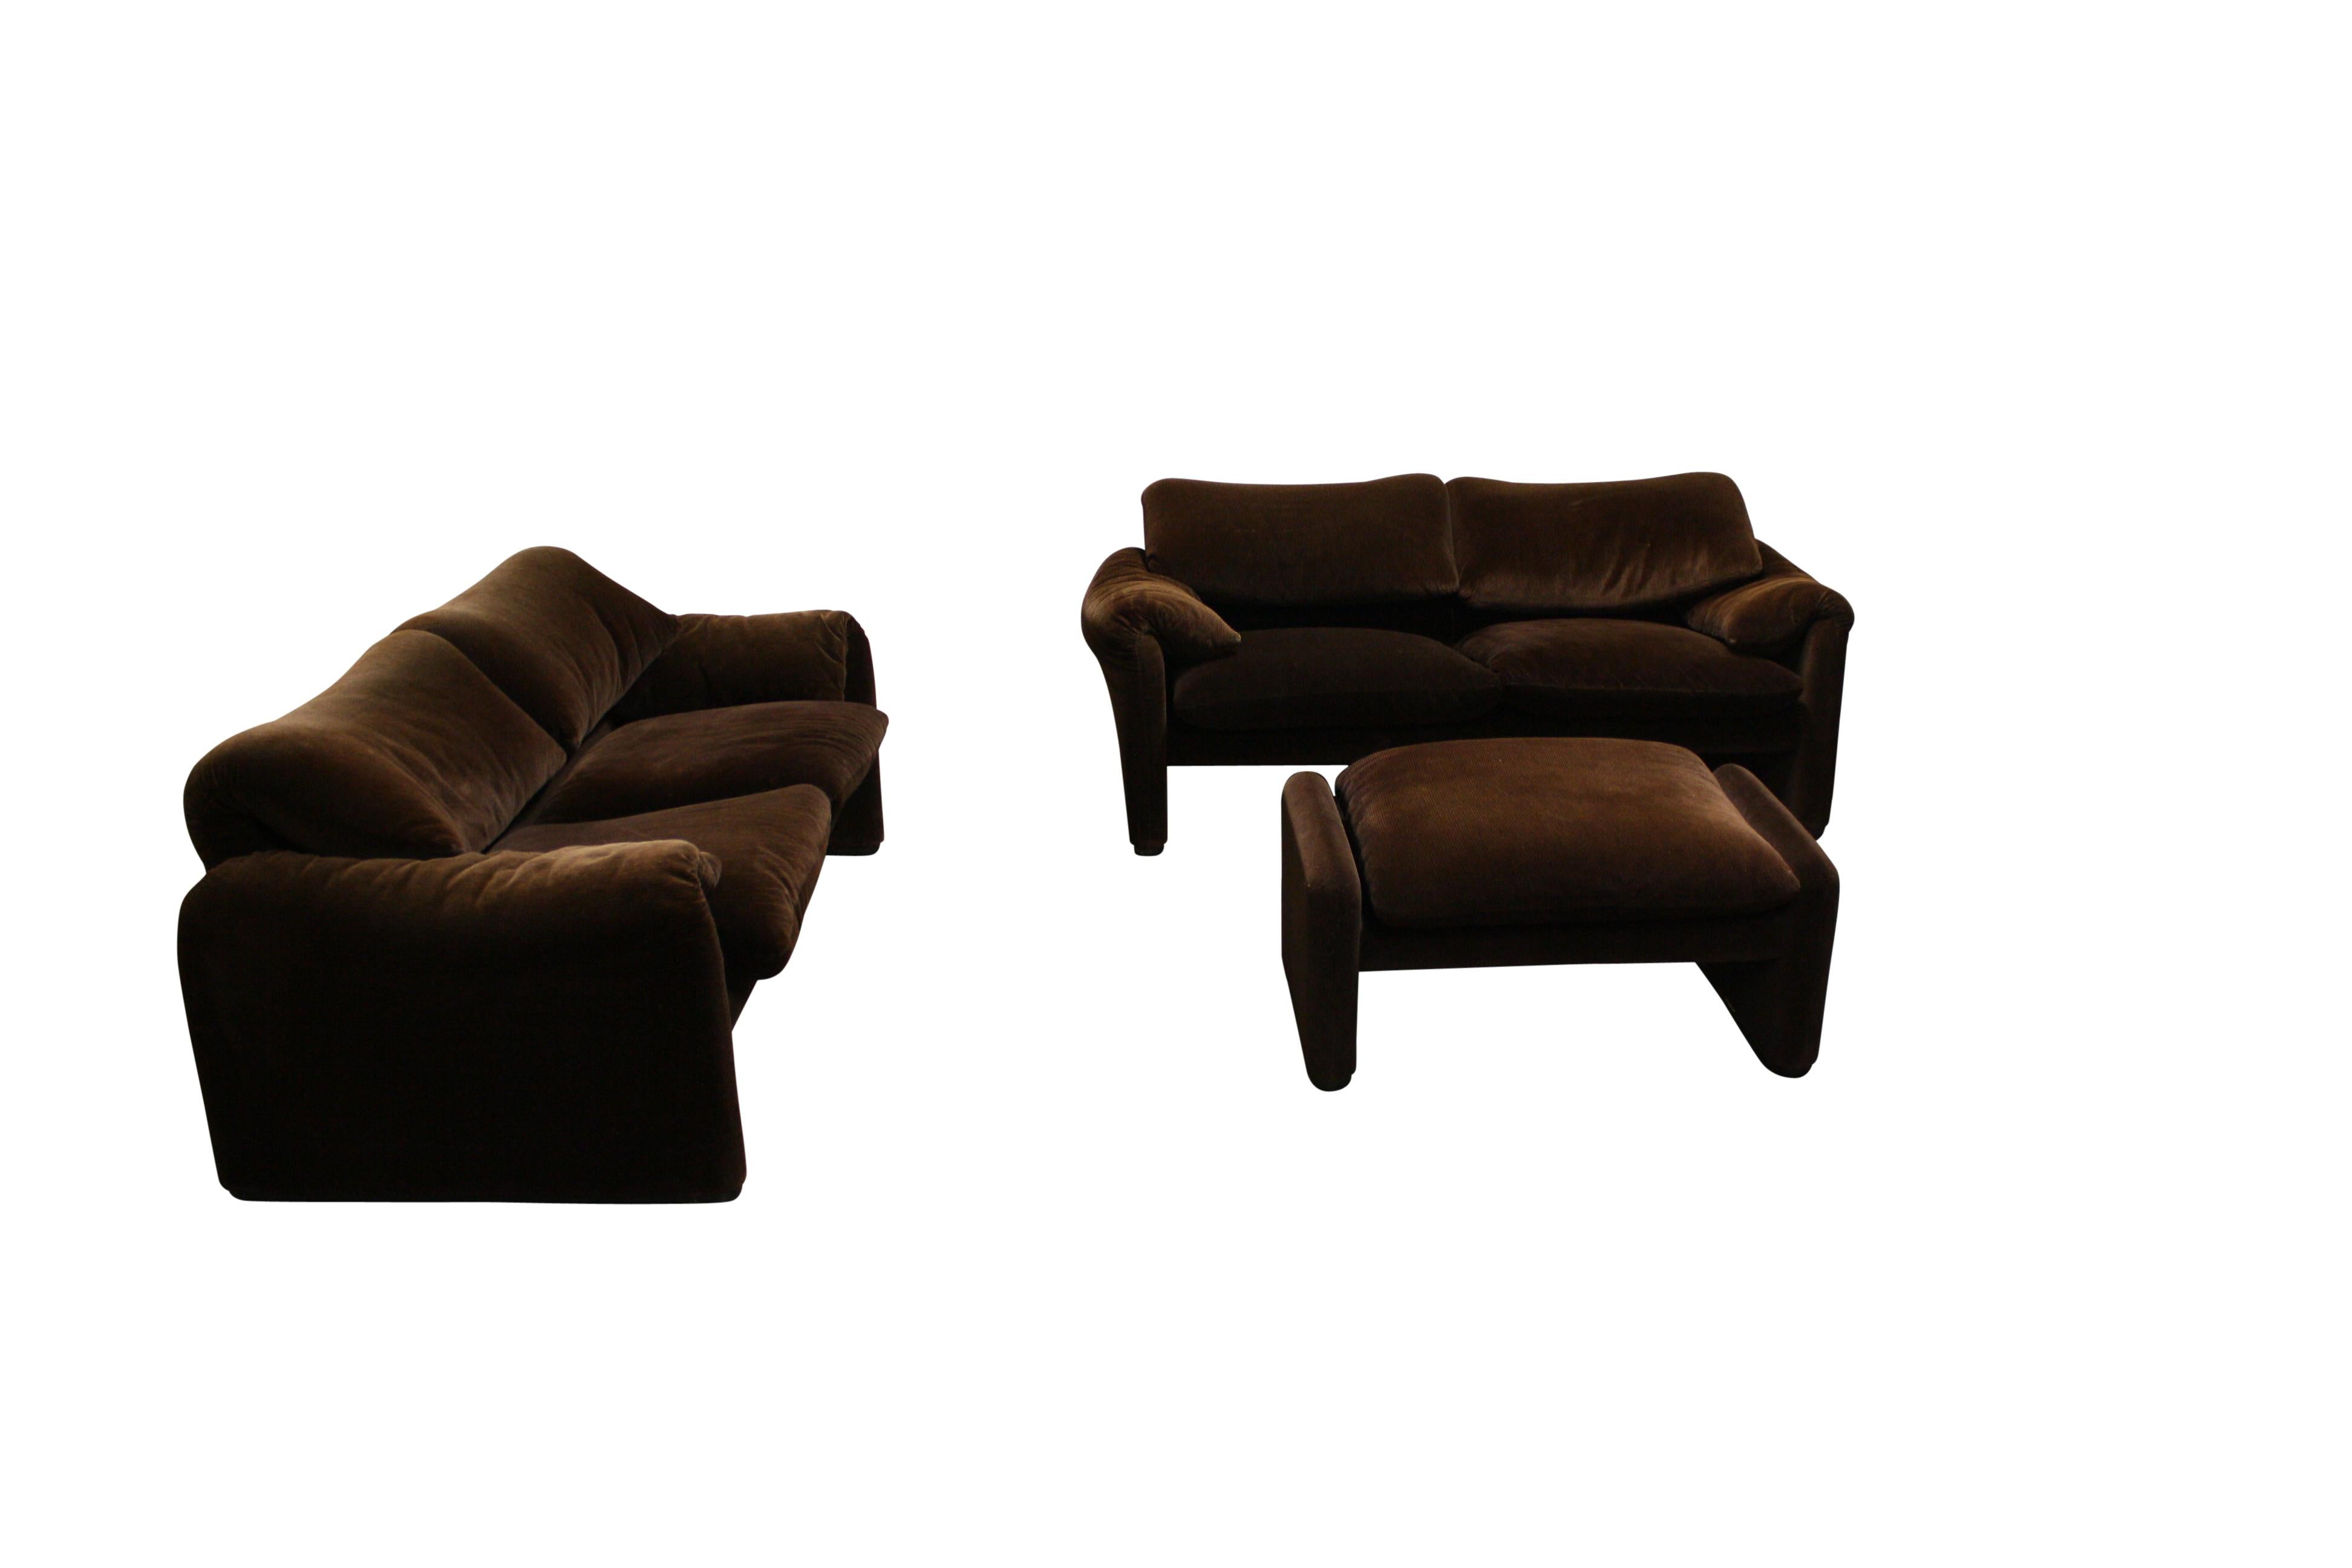 Vintage maralunga sofa set designed by Vico Magistretti for Cassina in 1973.

These iconic design sofas are upholstered in a dark brown velvet fabric and come with the ottoman.

The backrests are adjustable.

Labeled.

In perfect